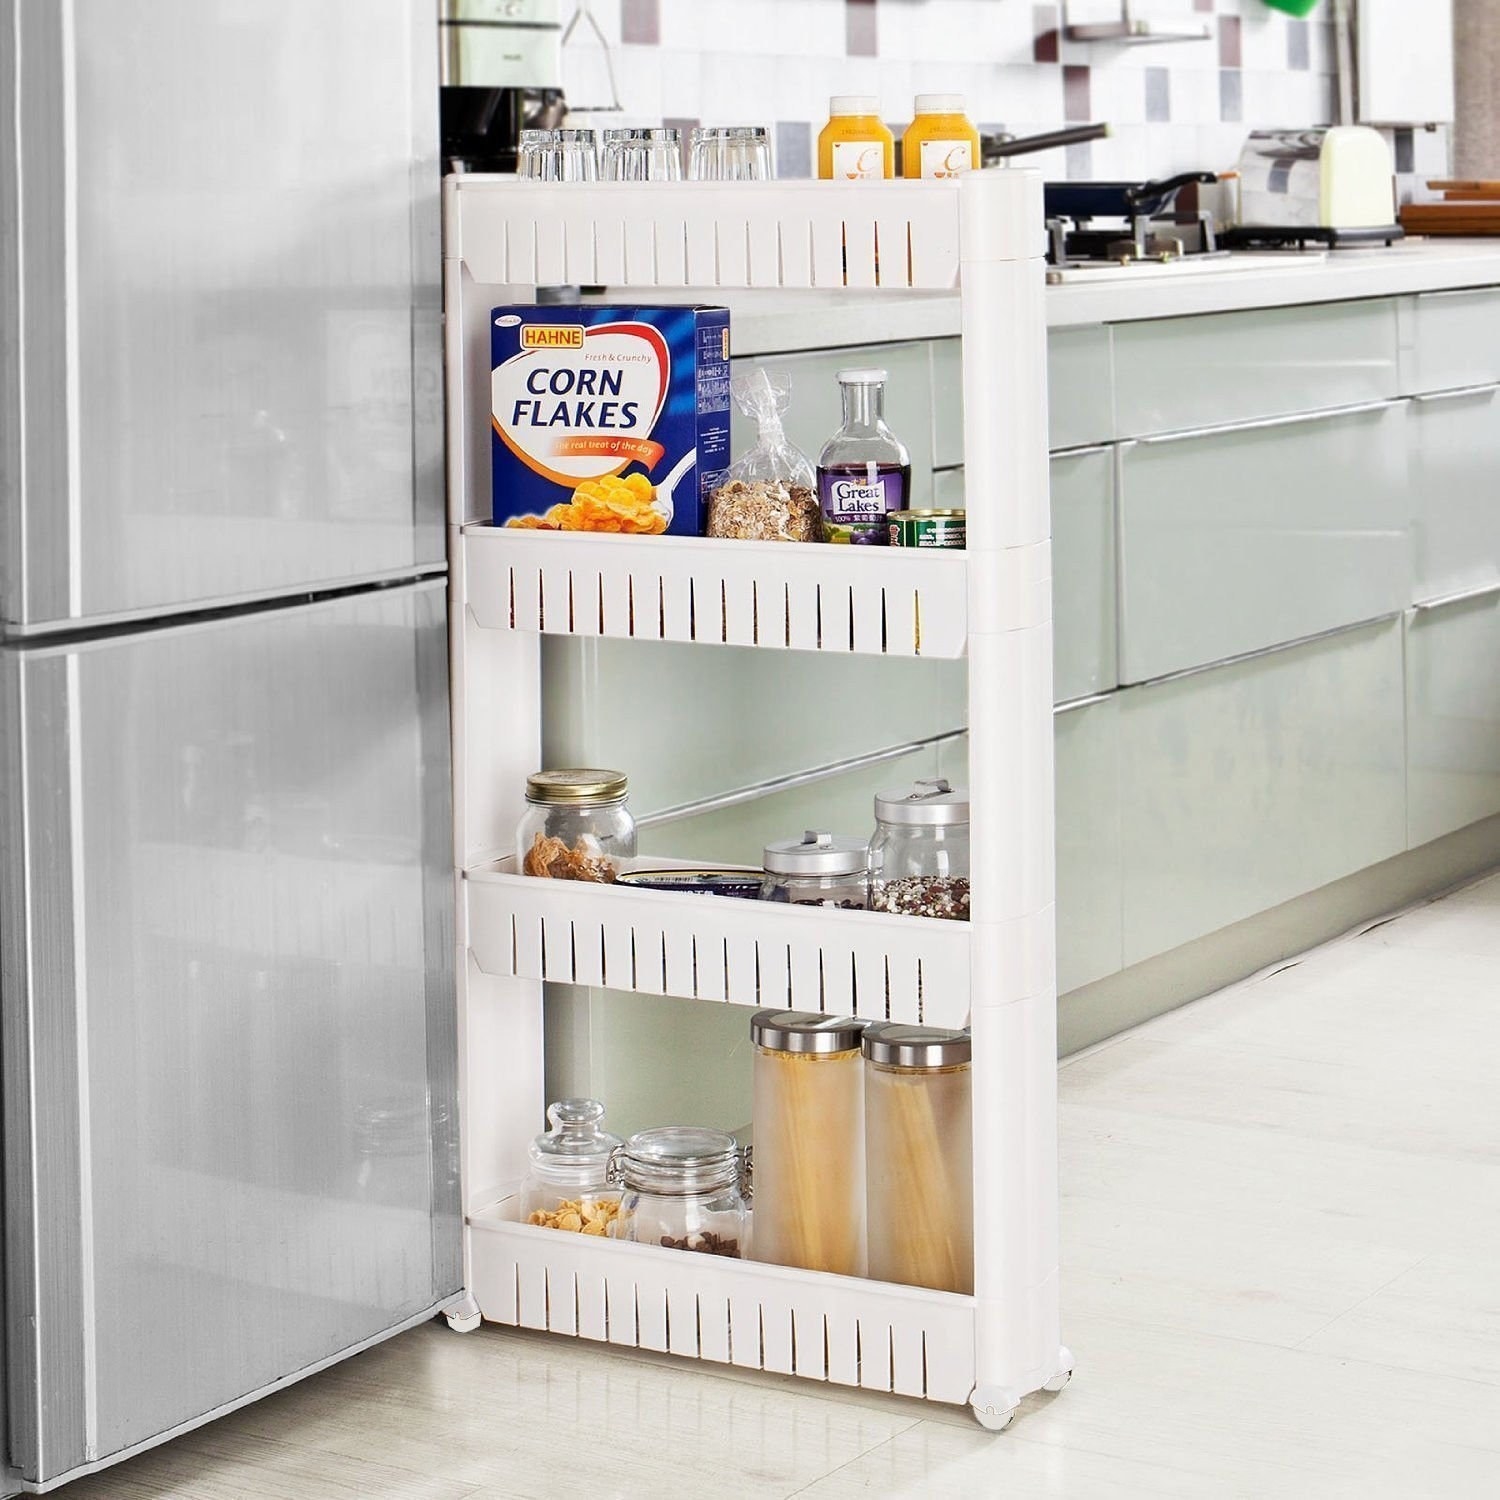 A slim rack with food items in it being wheeled into the space between a fridge and a counter 